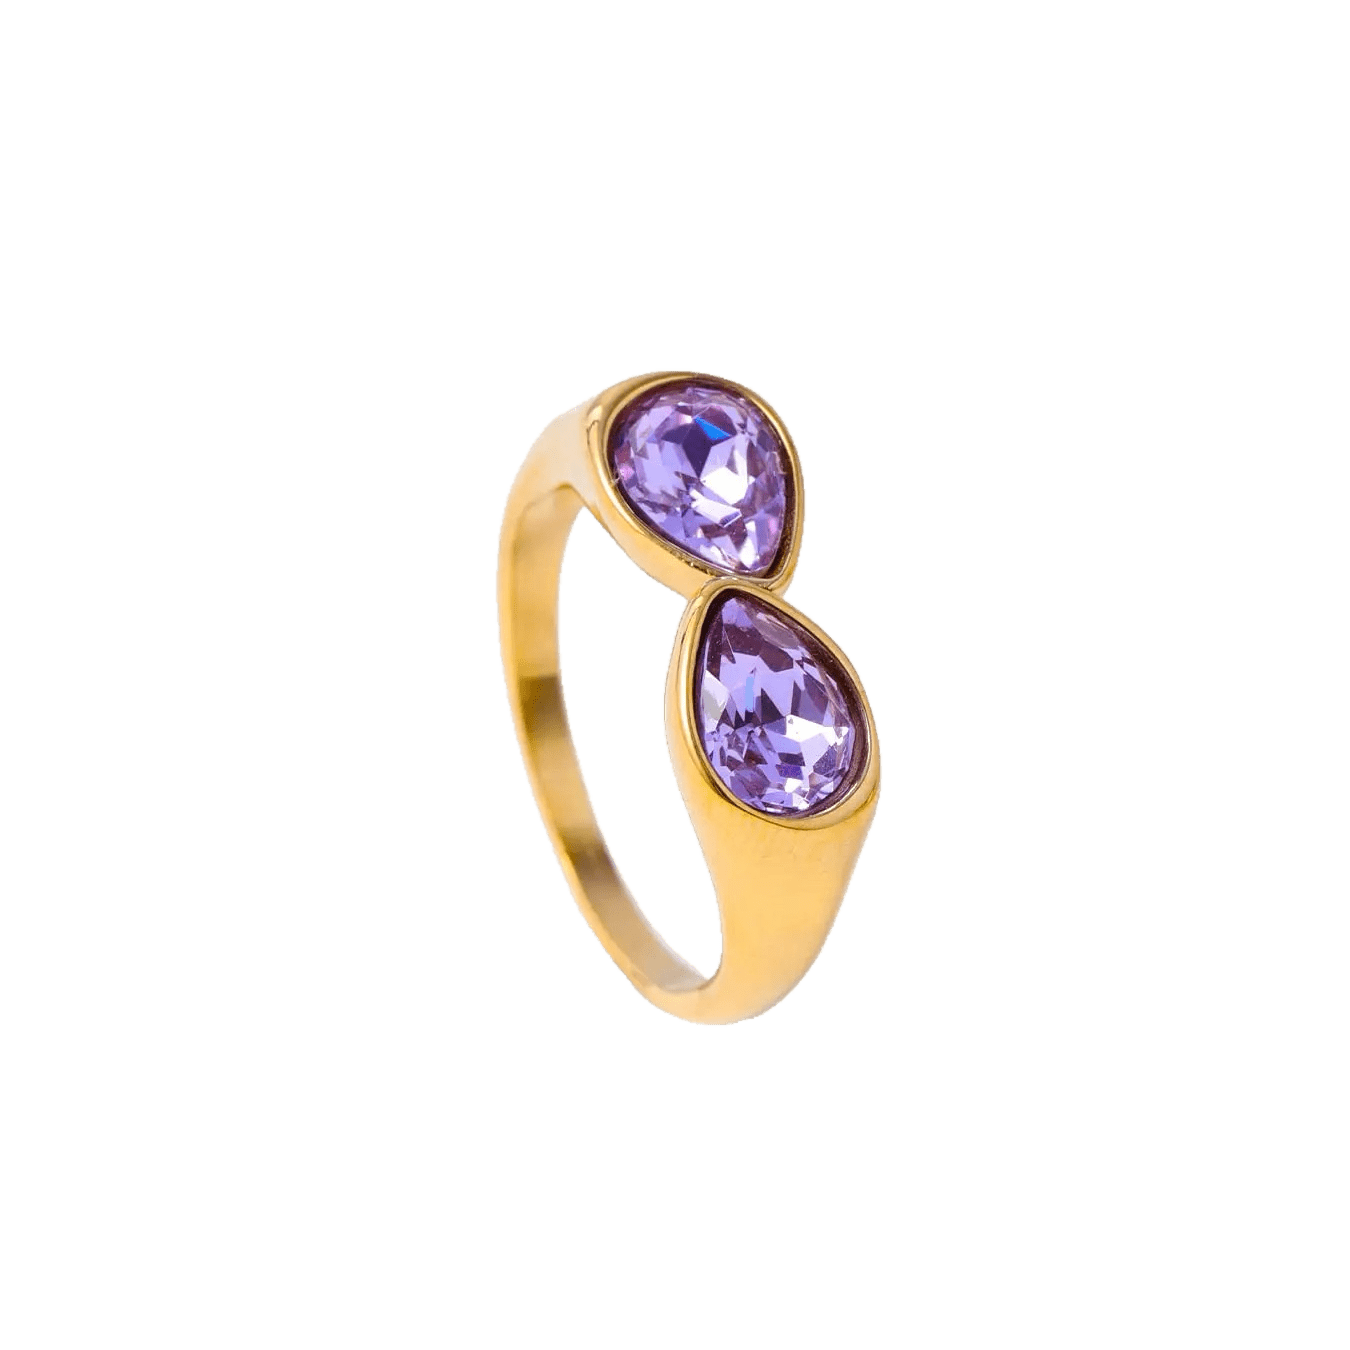 Purple adjustable ring with two glass gemstones